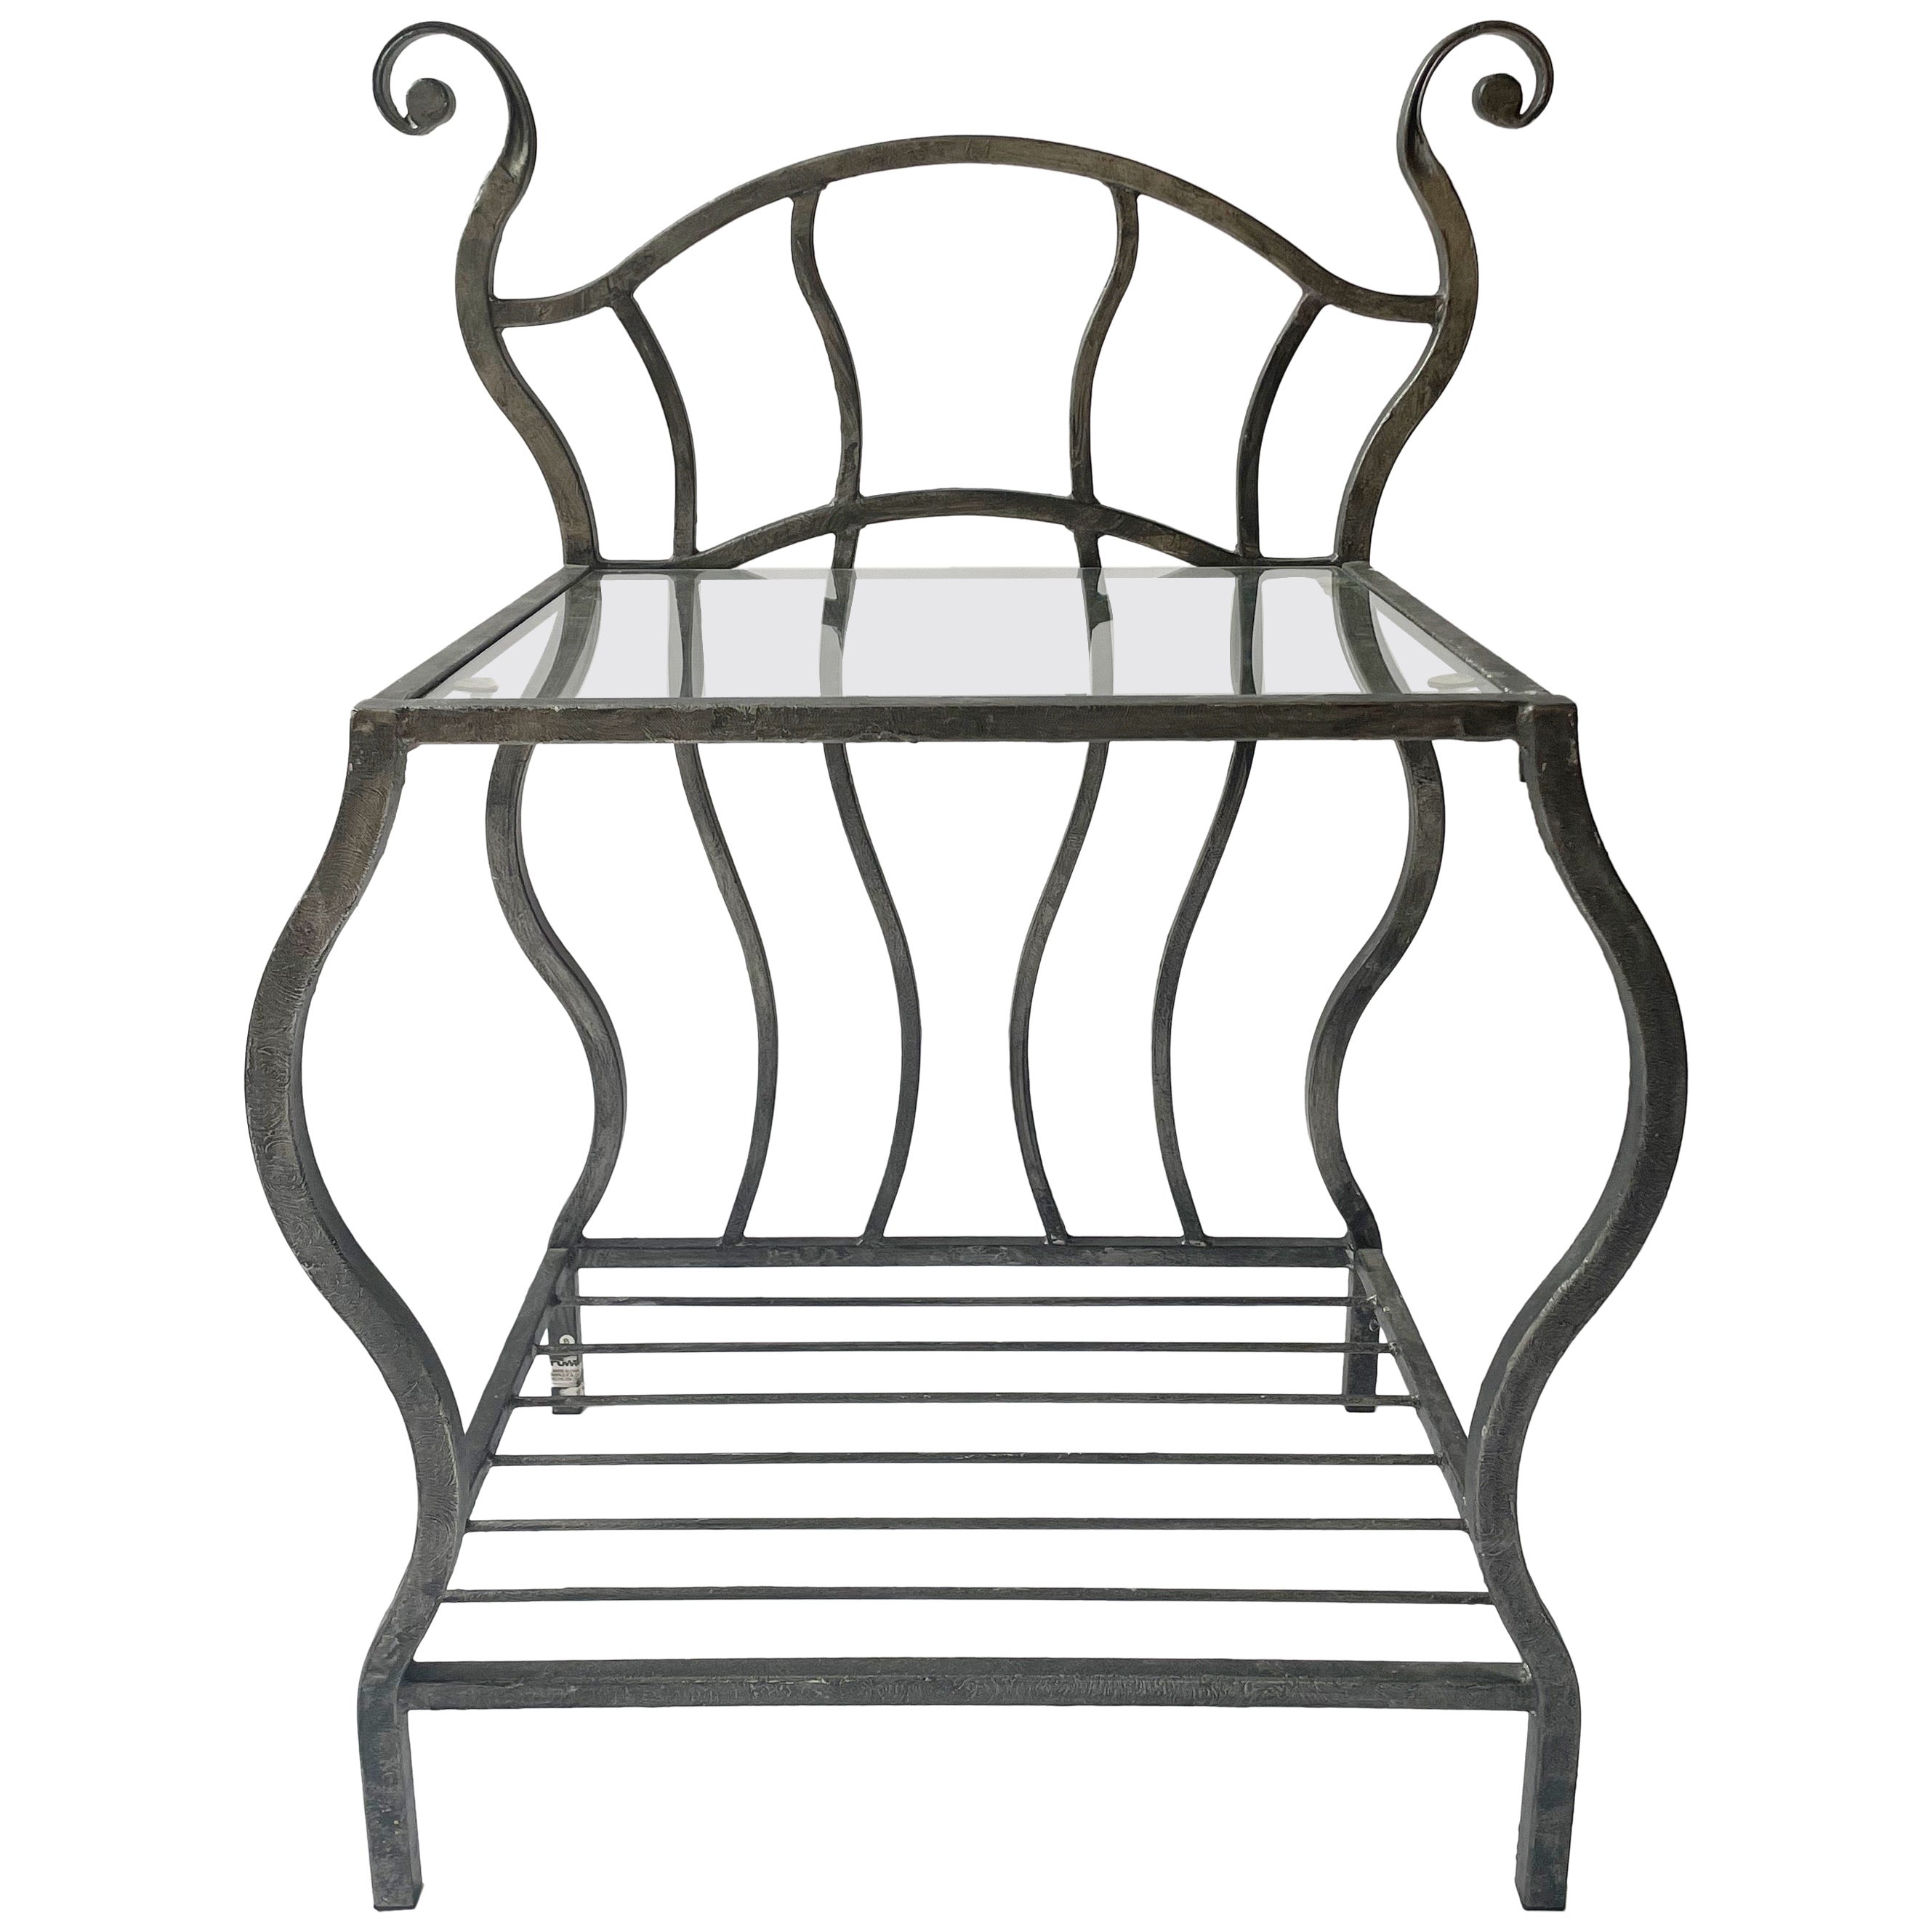 Curvy Wrought Iron Side Table